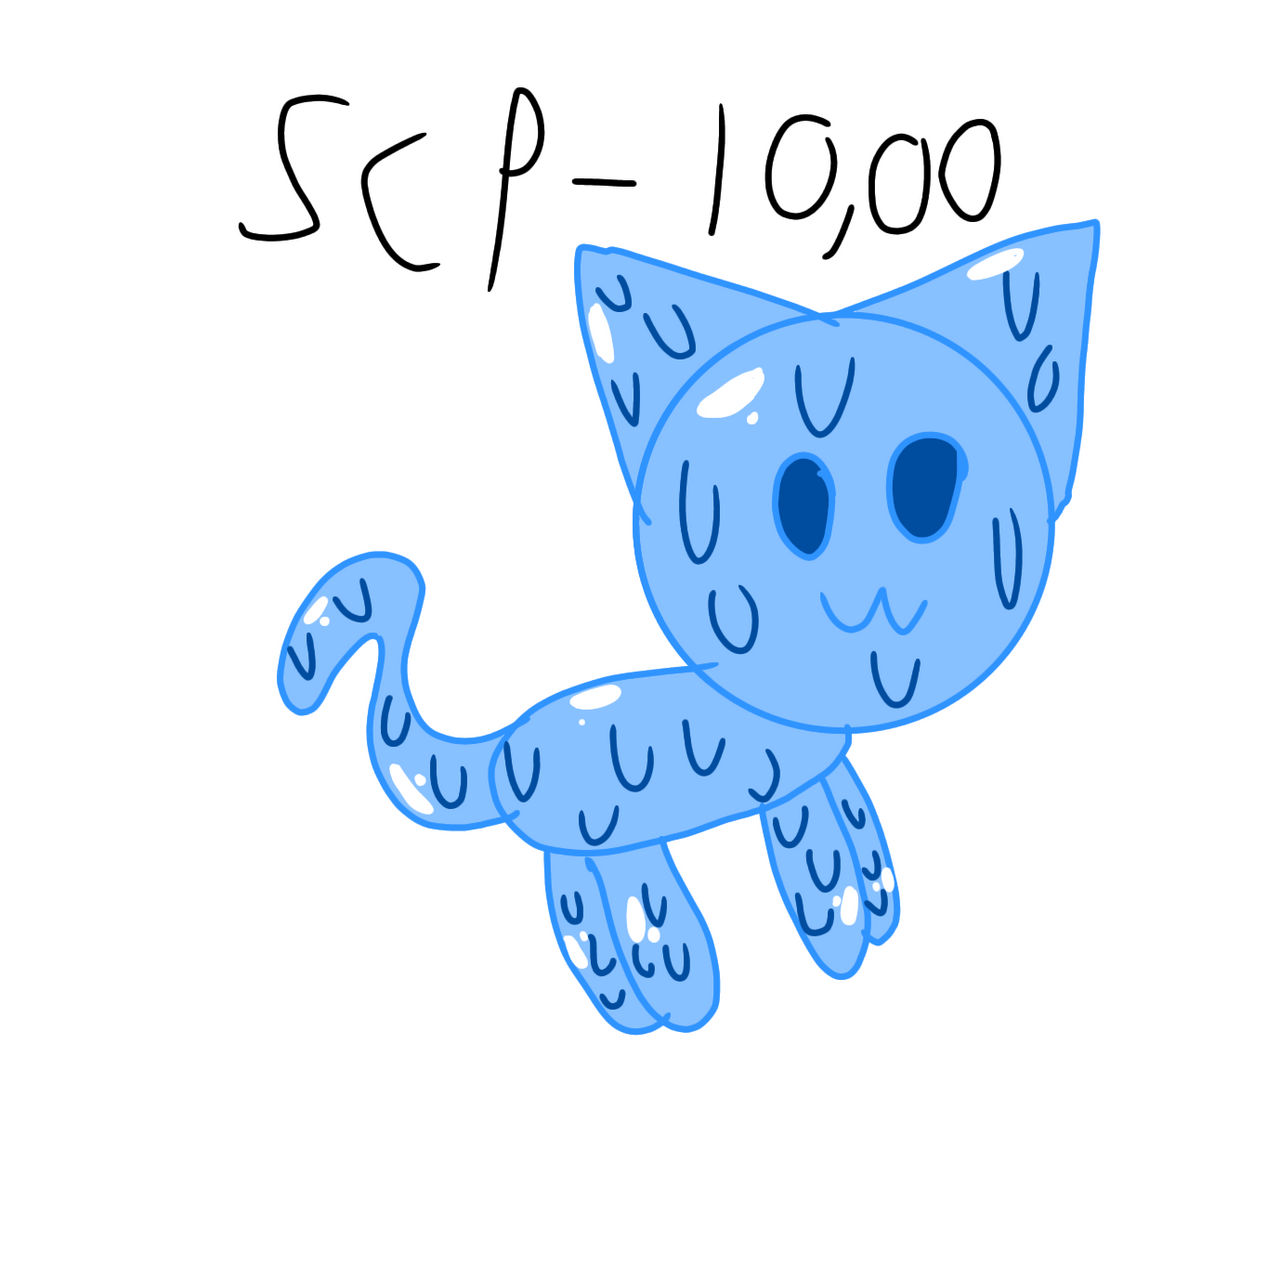 New SCP-10000 